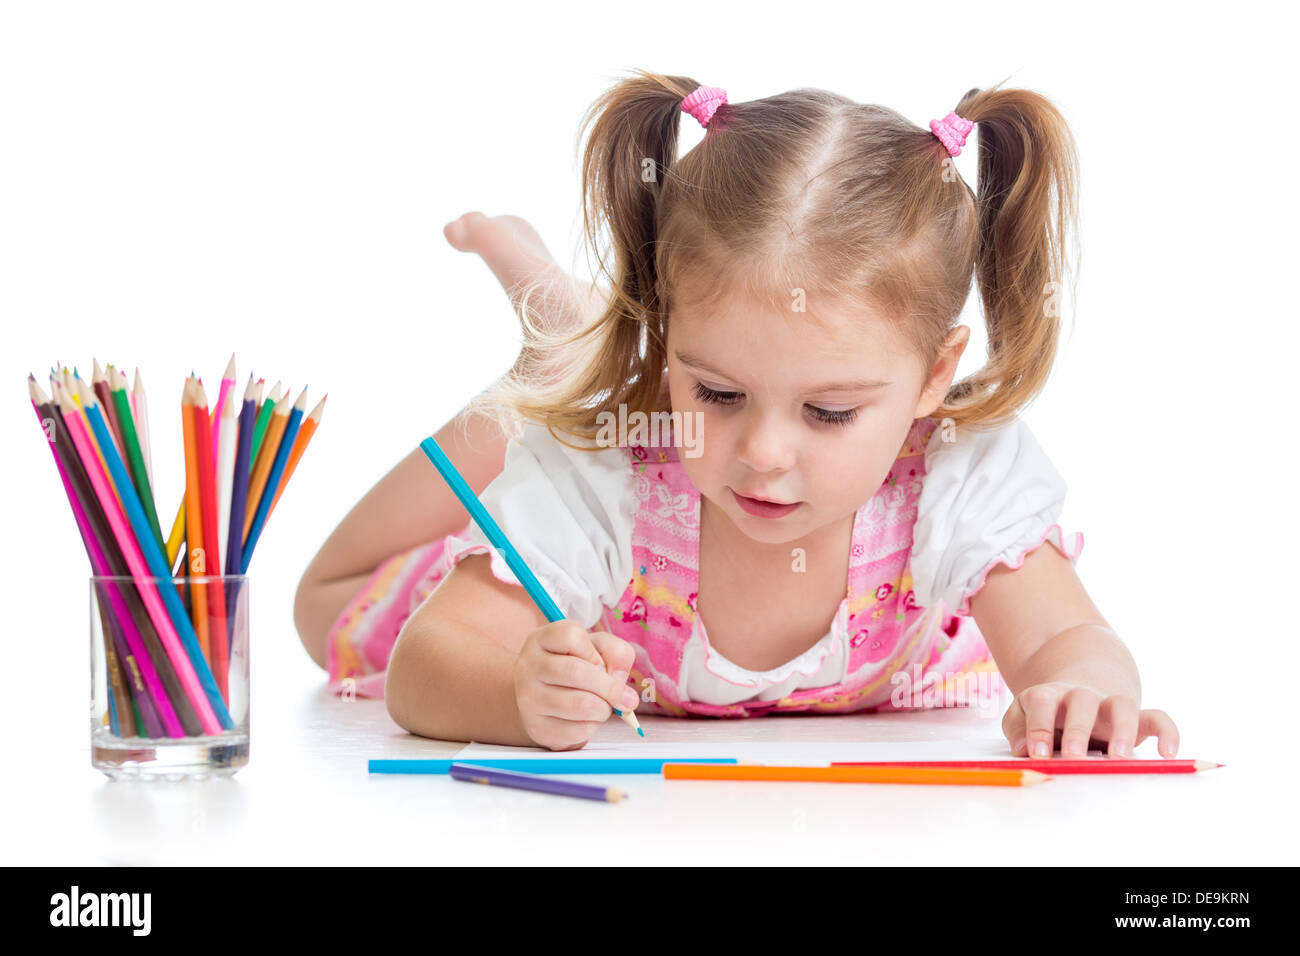 cute child drawing with colorful pencils Stock Photo